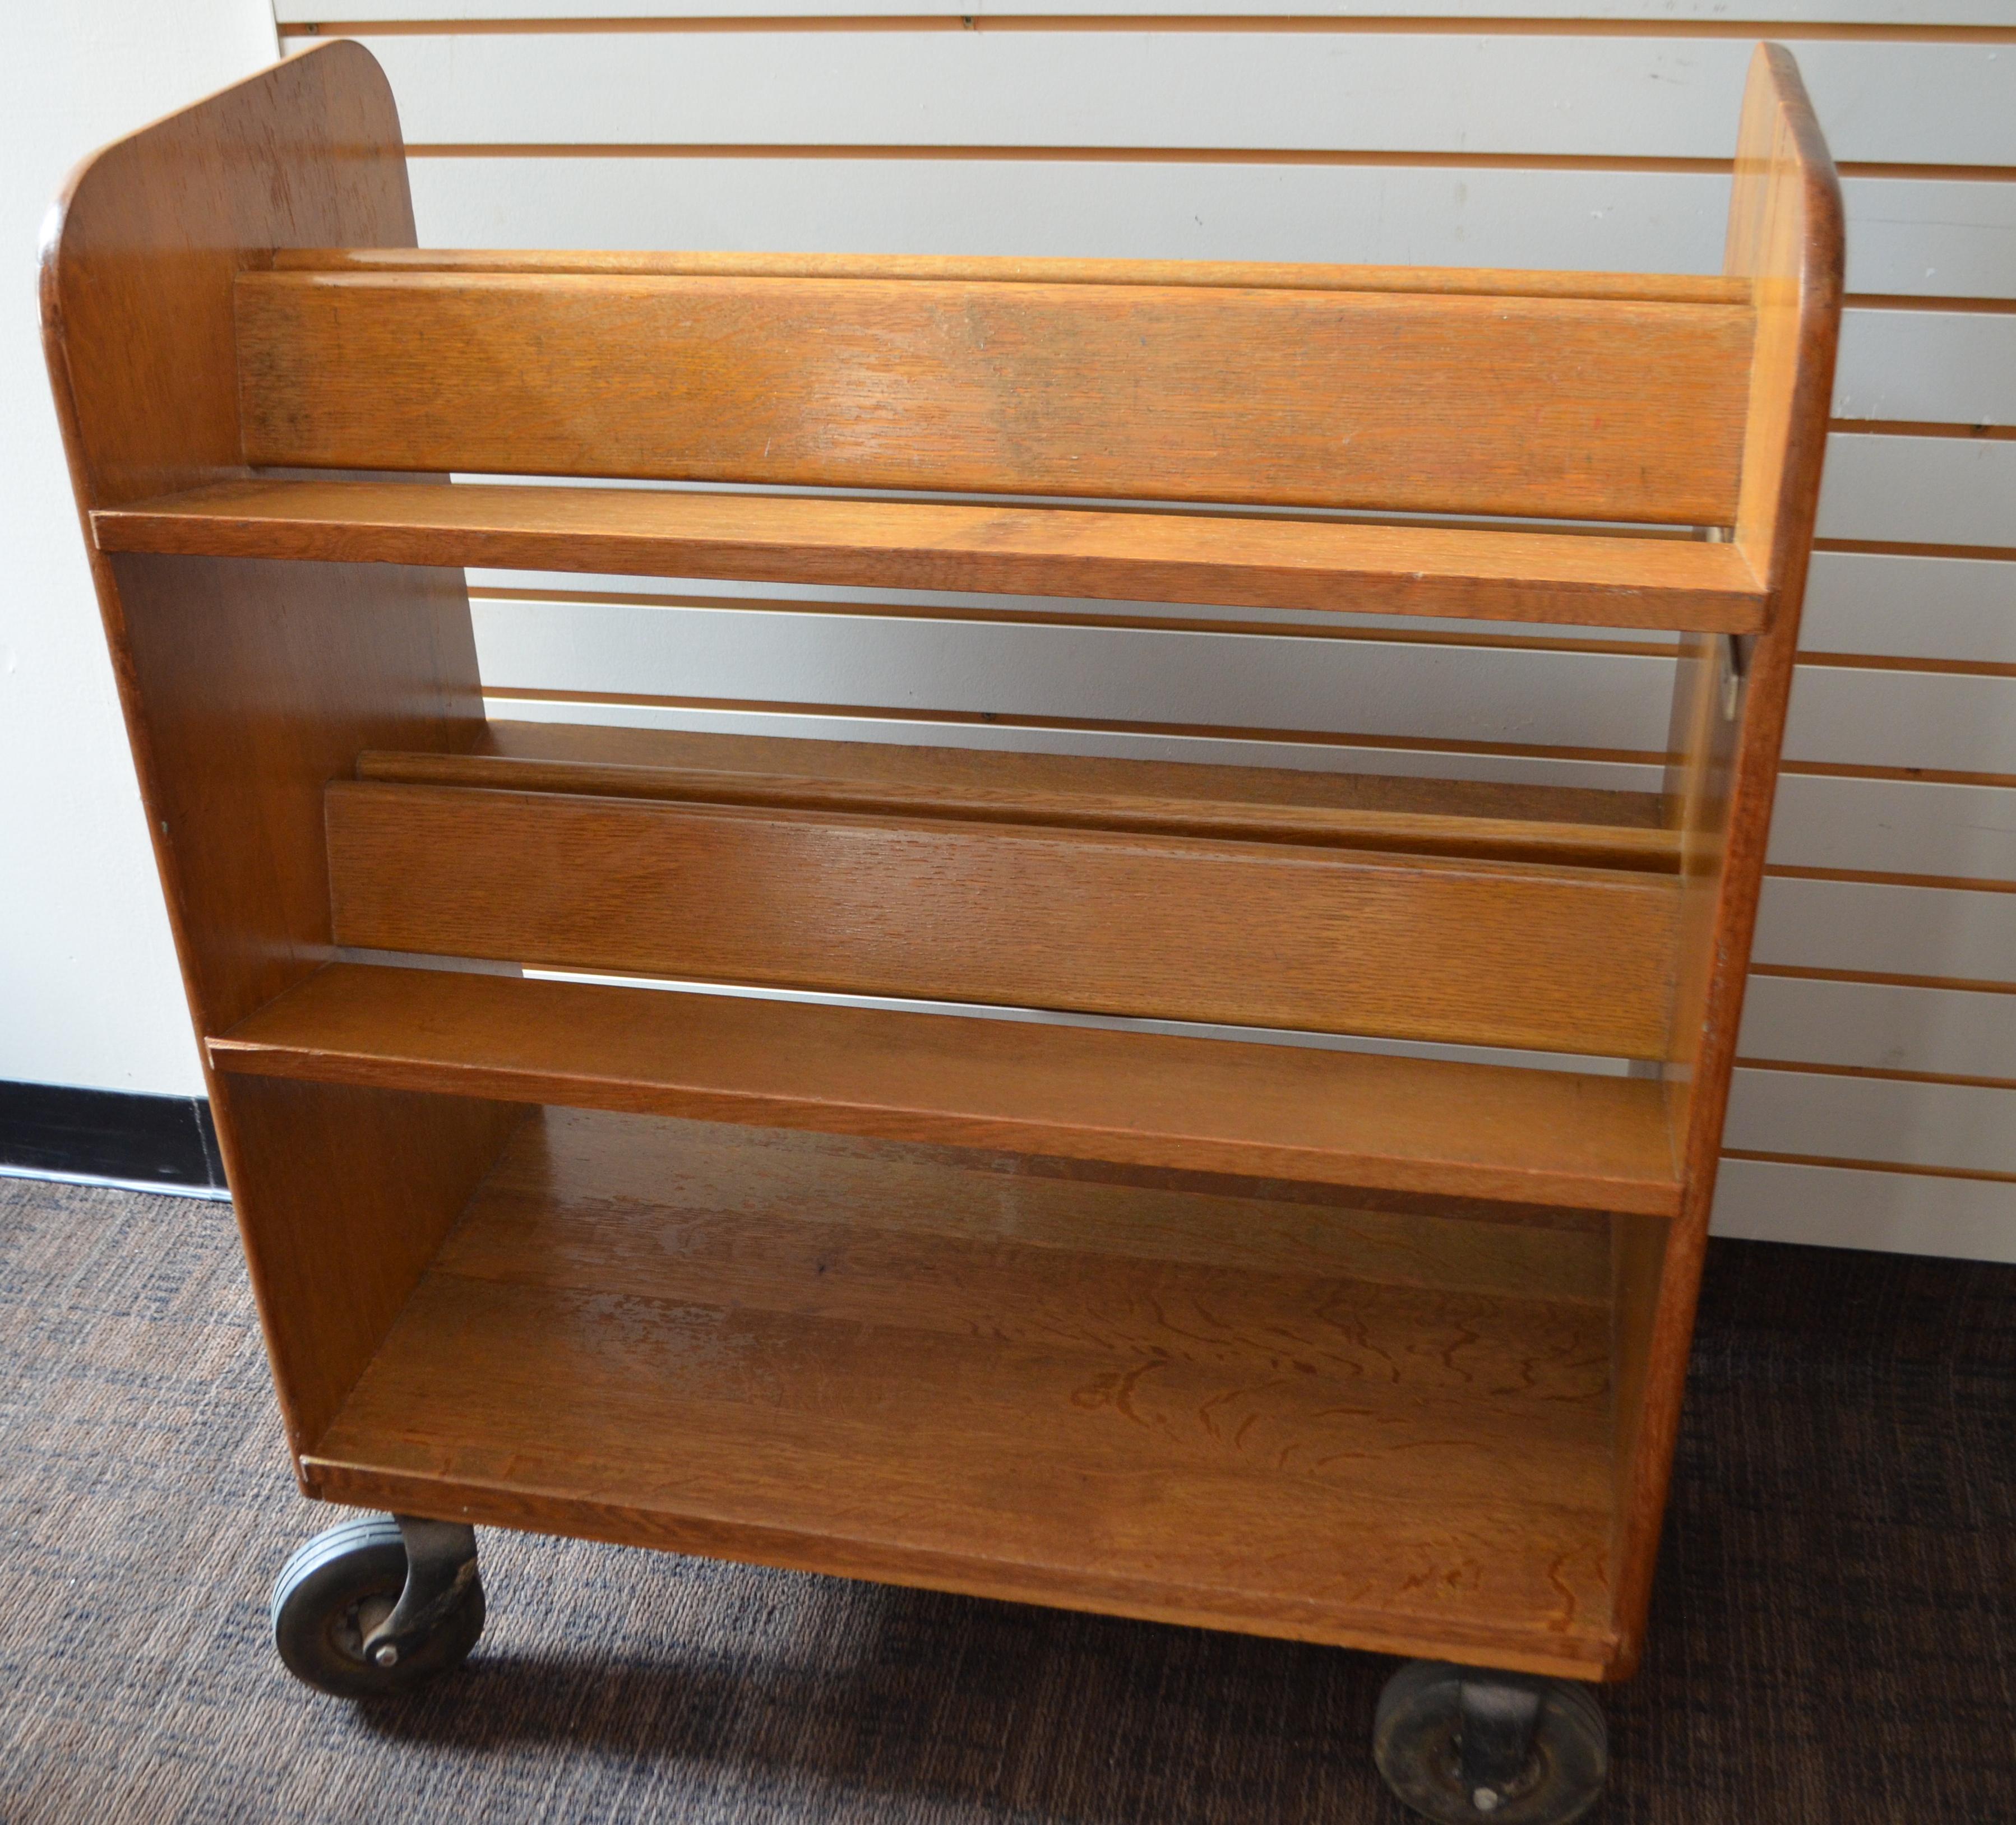 Midcentury Oak Book Cart with slanted Shelves on Wheels from Public Library 5